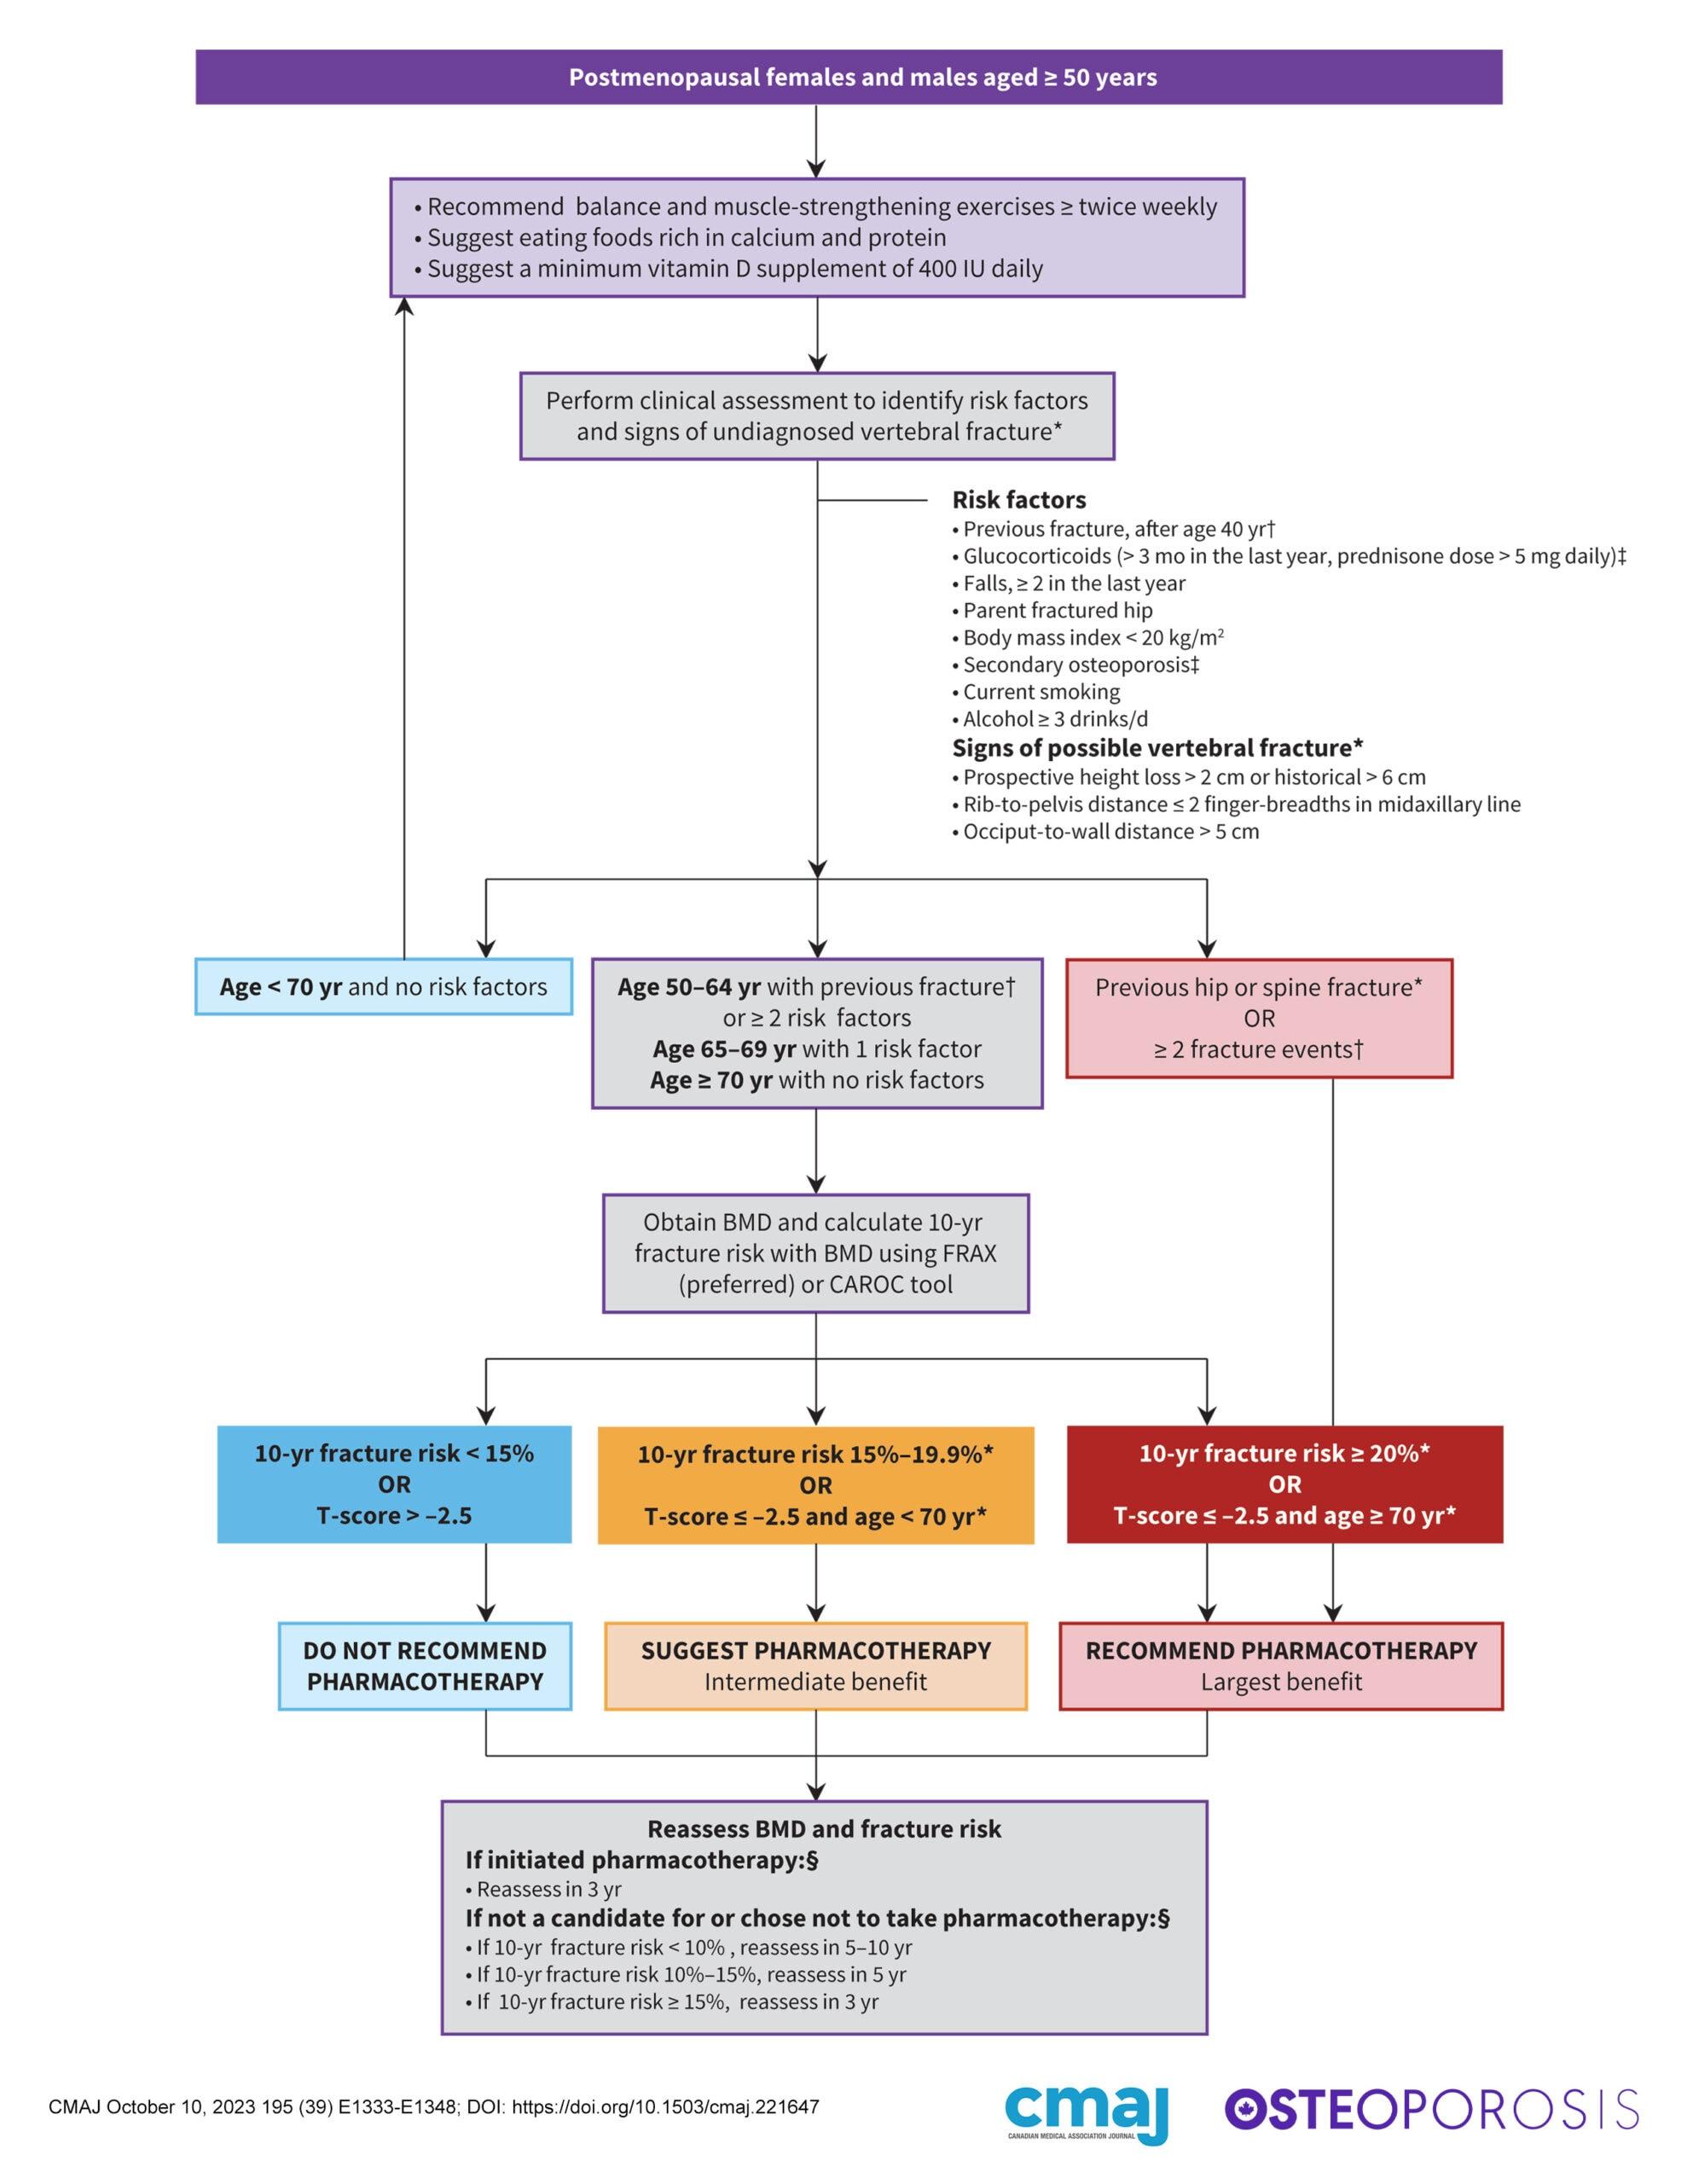 Algorithm showing Integrated approach to the management of bone health and fracture prevention in postmenopausal females and males 50 years and older.